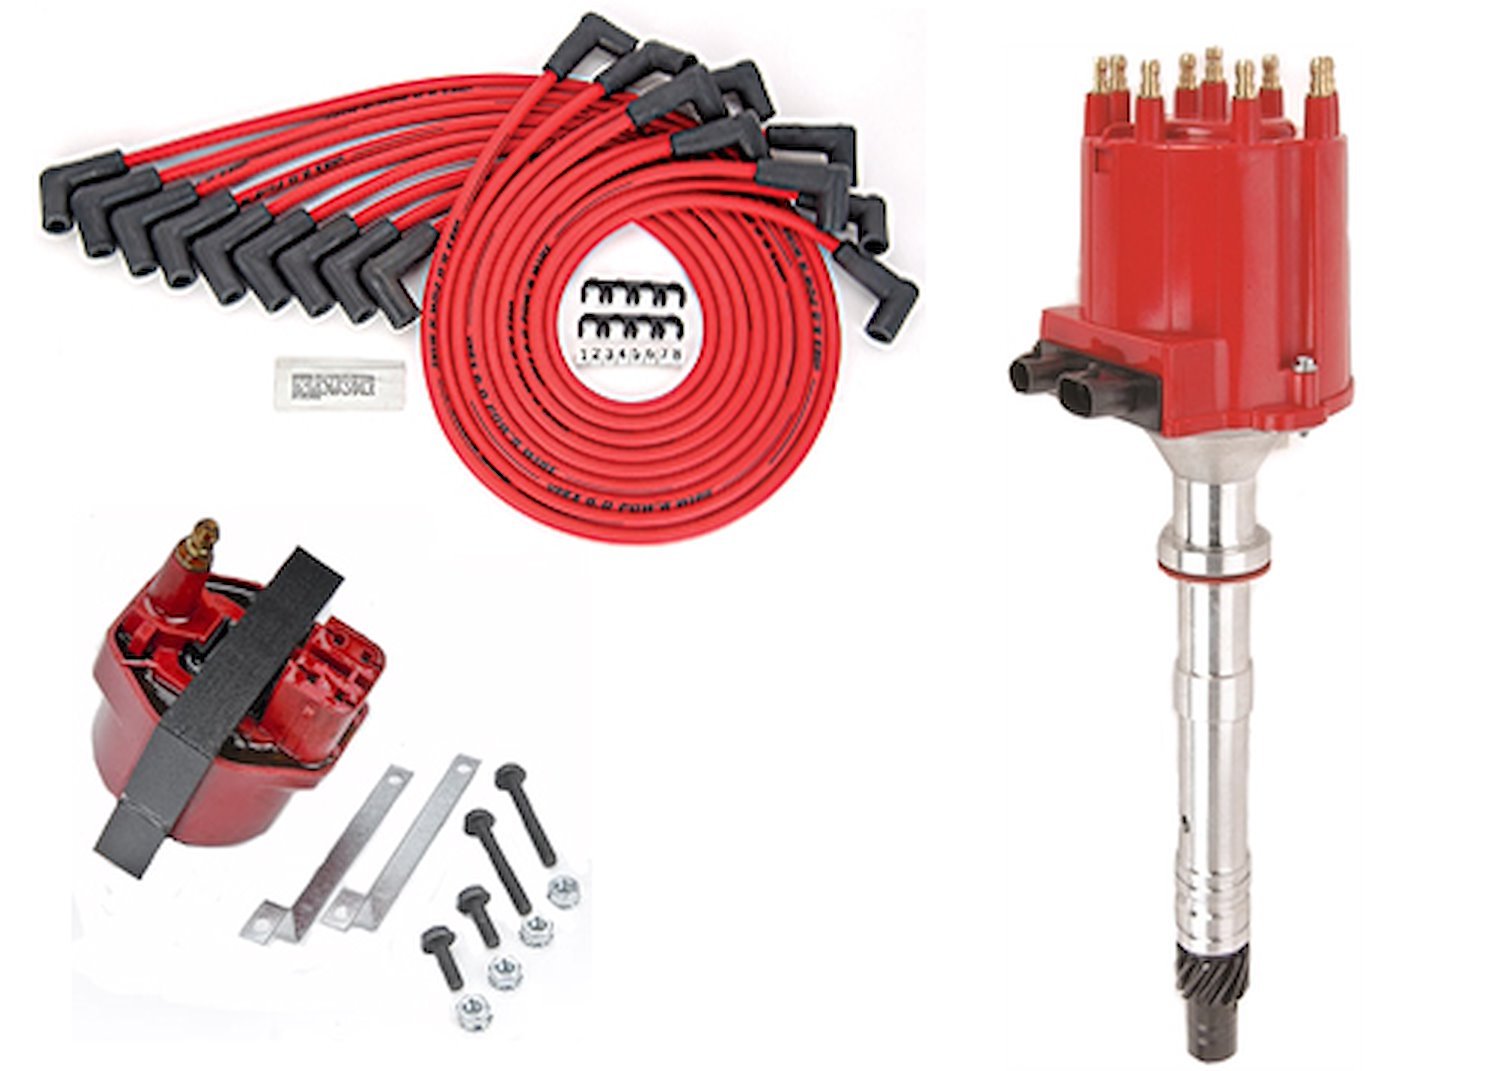 Distributor, Spark Plug Wires and Coil Kit